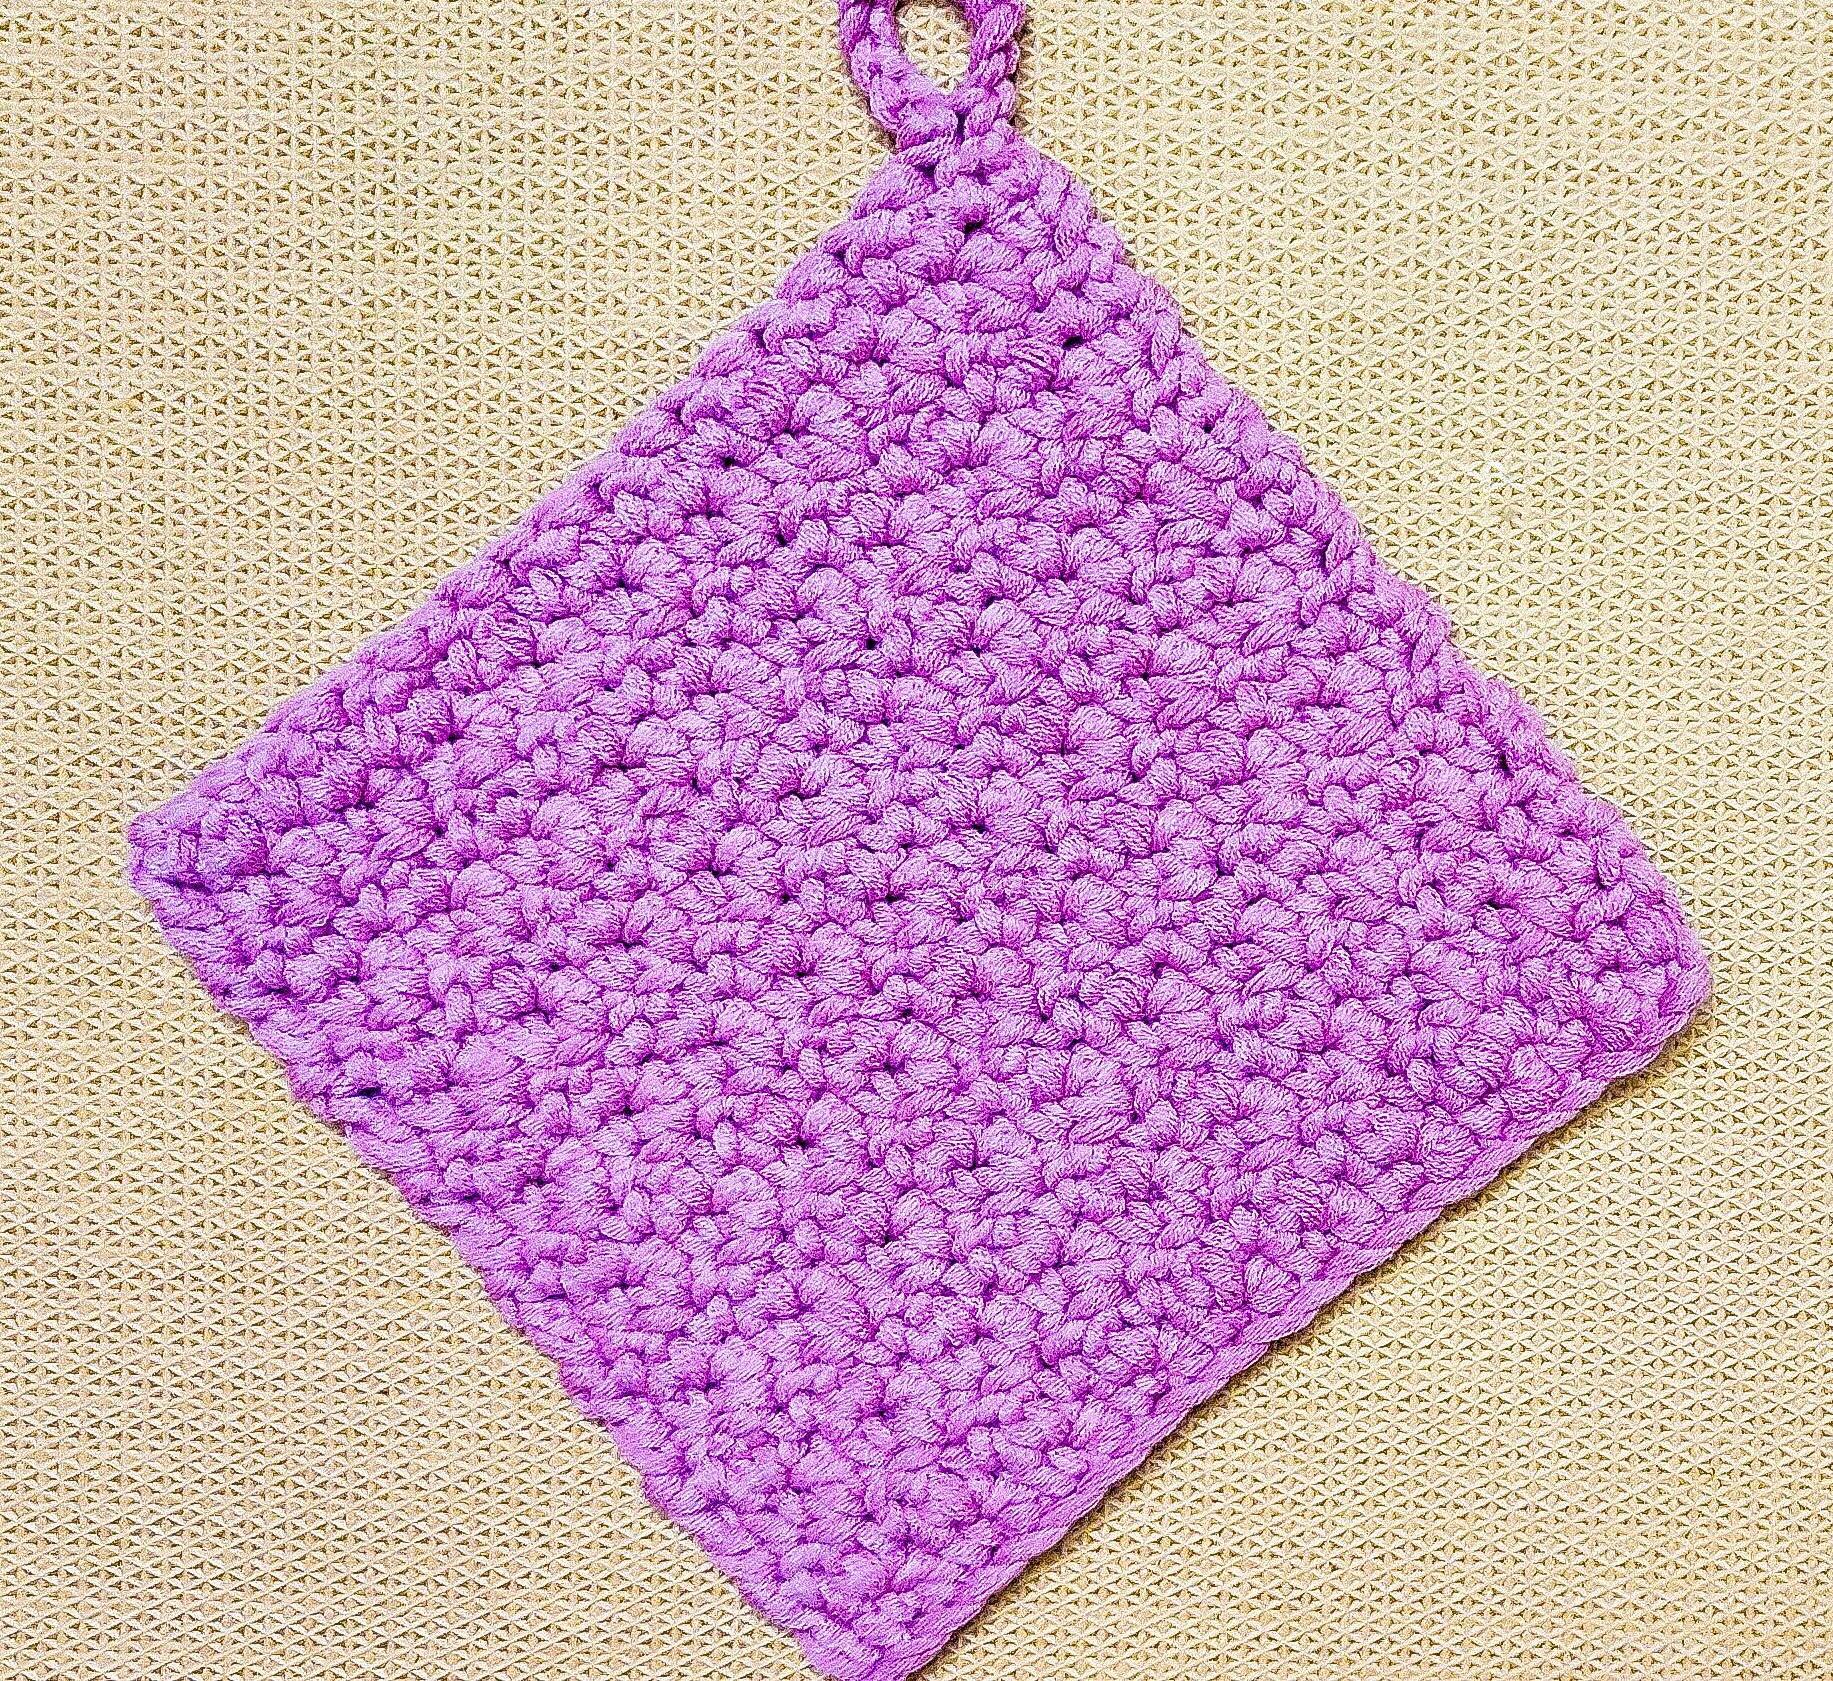 Crochet Square Potholder With Thick Yarn